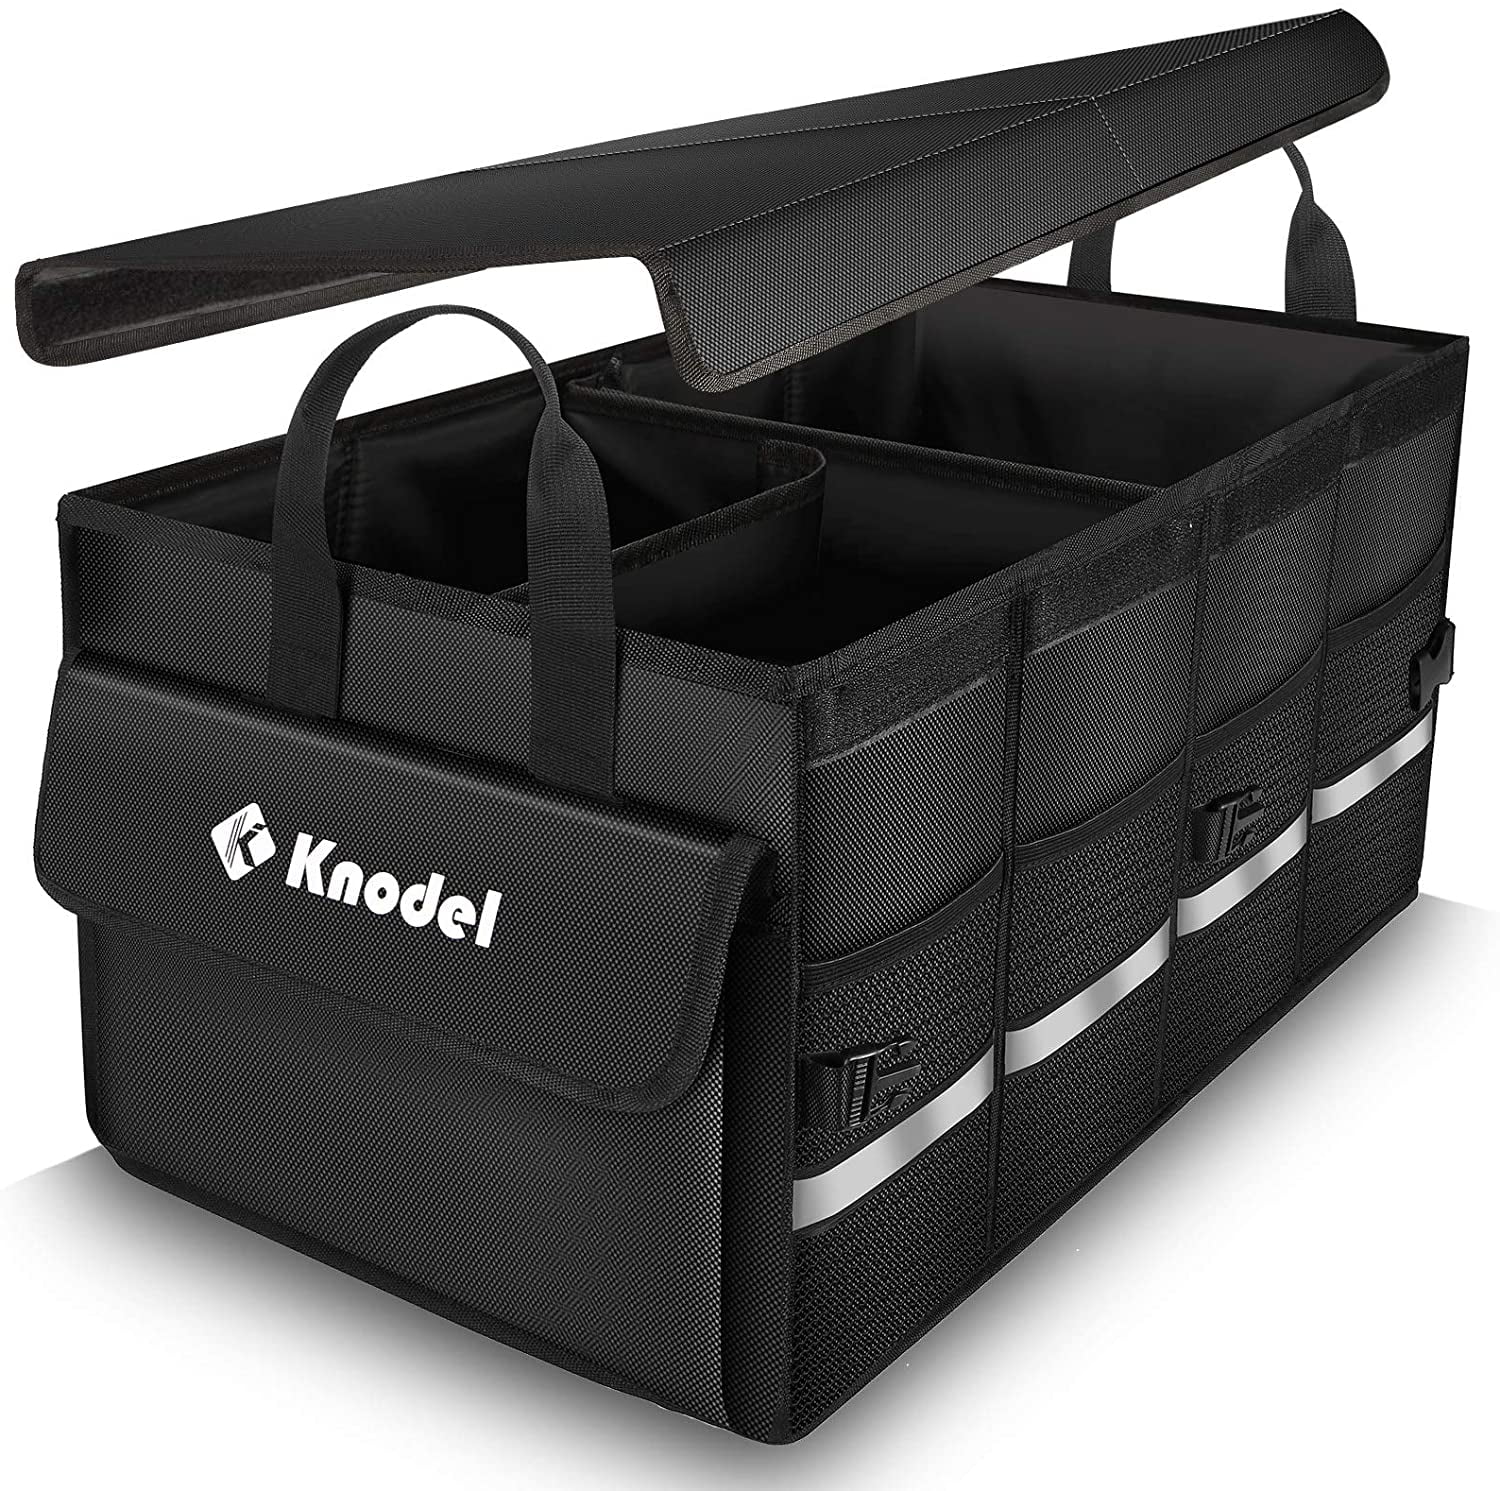 K Knodel Car Trunk Organizer, Foldable Lid, Collapsible Cargo with Cover  Medium